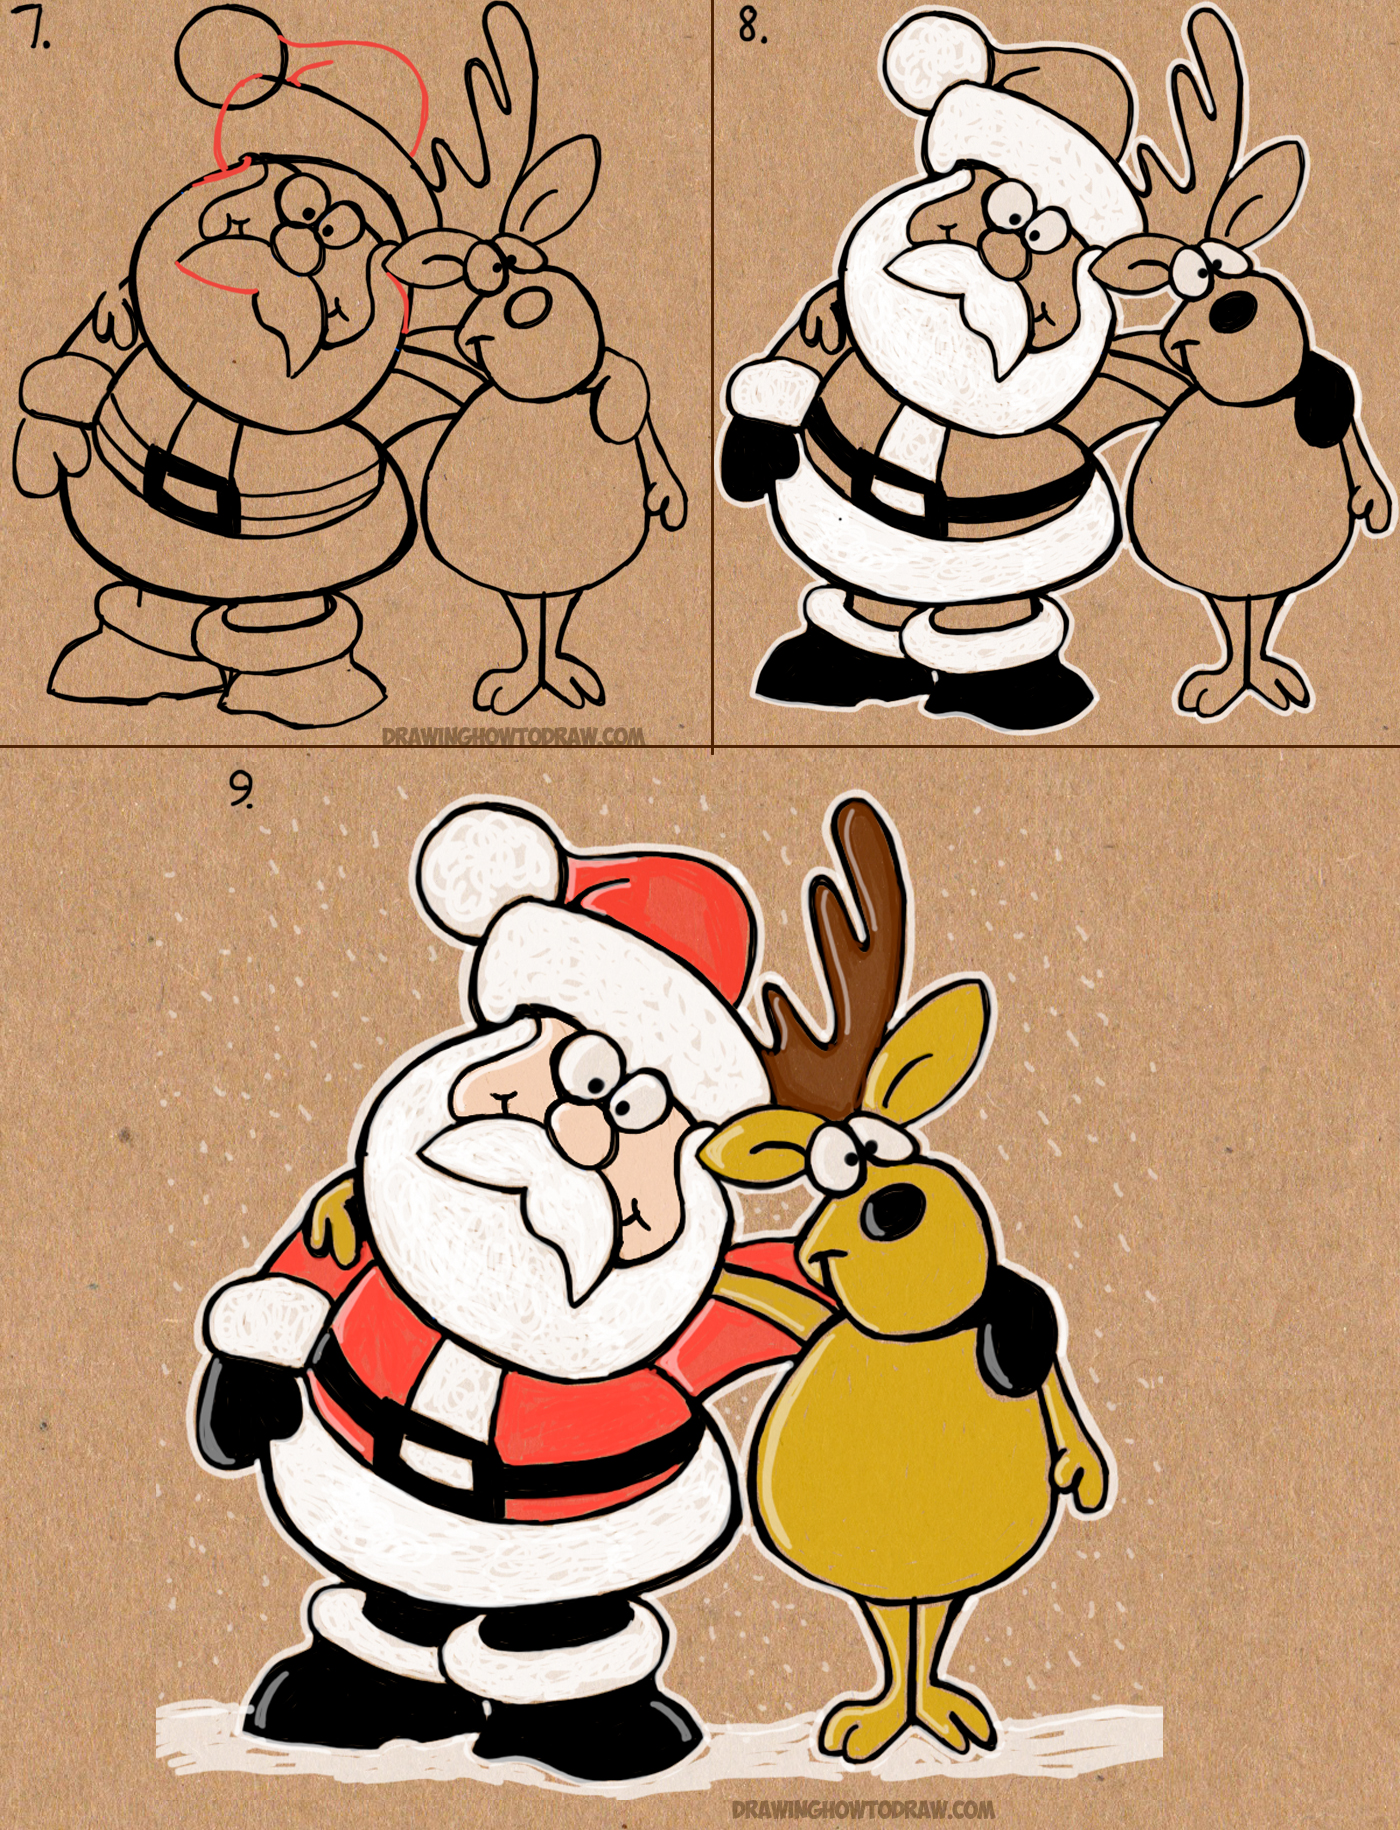 How to Draw Cartoon Santa Claus and Reindeer Simple Step by Step Drawing Lesson